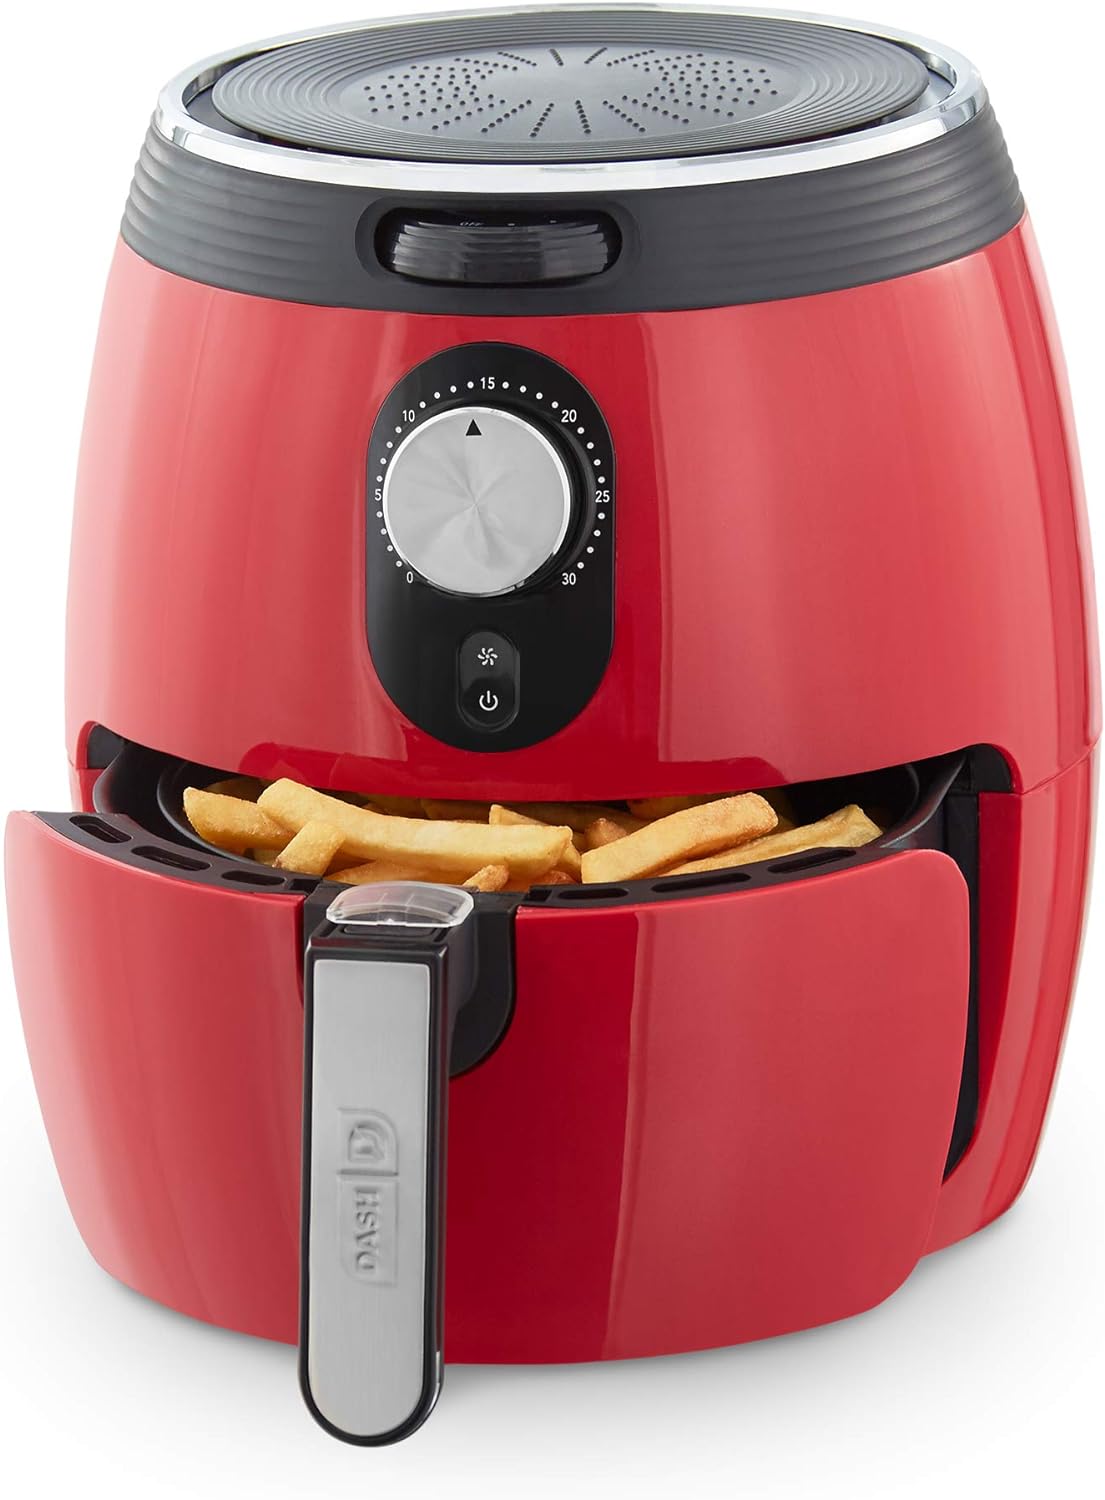 Decided to get an air fryer to make my own stuff and eat out less, and this was on sale. Wasn't enthusiastic about the color, but it' not too hideous. Used it to make my own potato wedges, fries, chicken wings (from frozen), and heated up frozen fish sticks. So far, they worked great.Potato wedges and fries needs almost no prep. Just cut them up into wedges or slices not too big, toss them into the basket and I set them to cook at 350 for 8 minutes. Works every time. May need to turn them over 